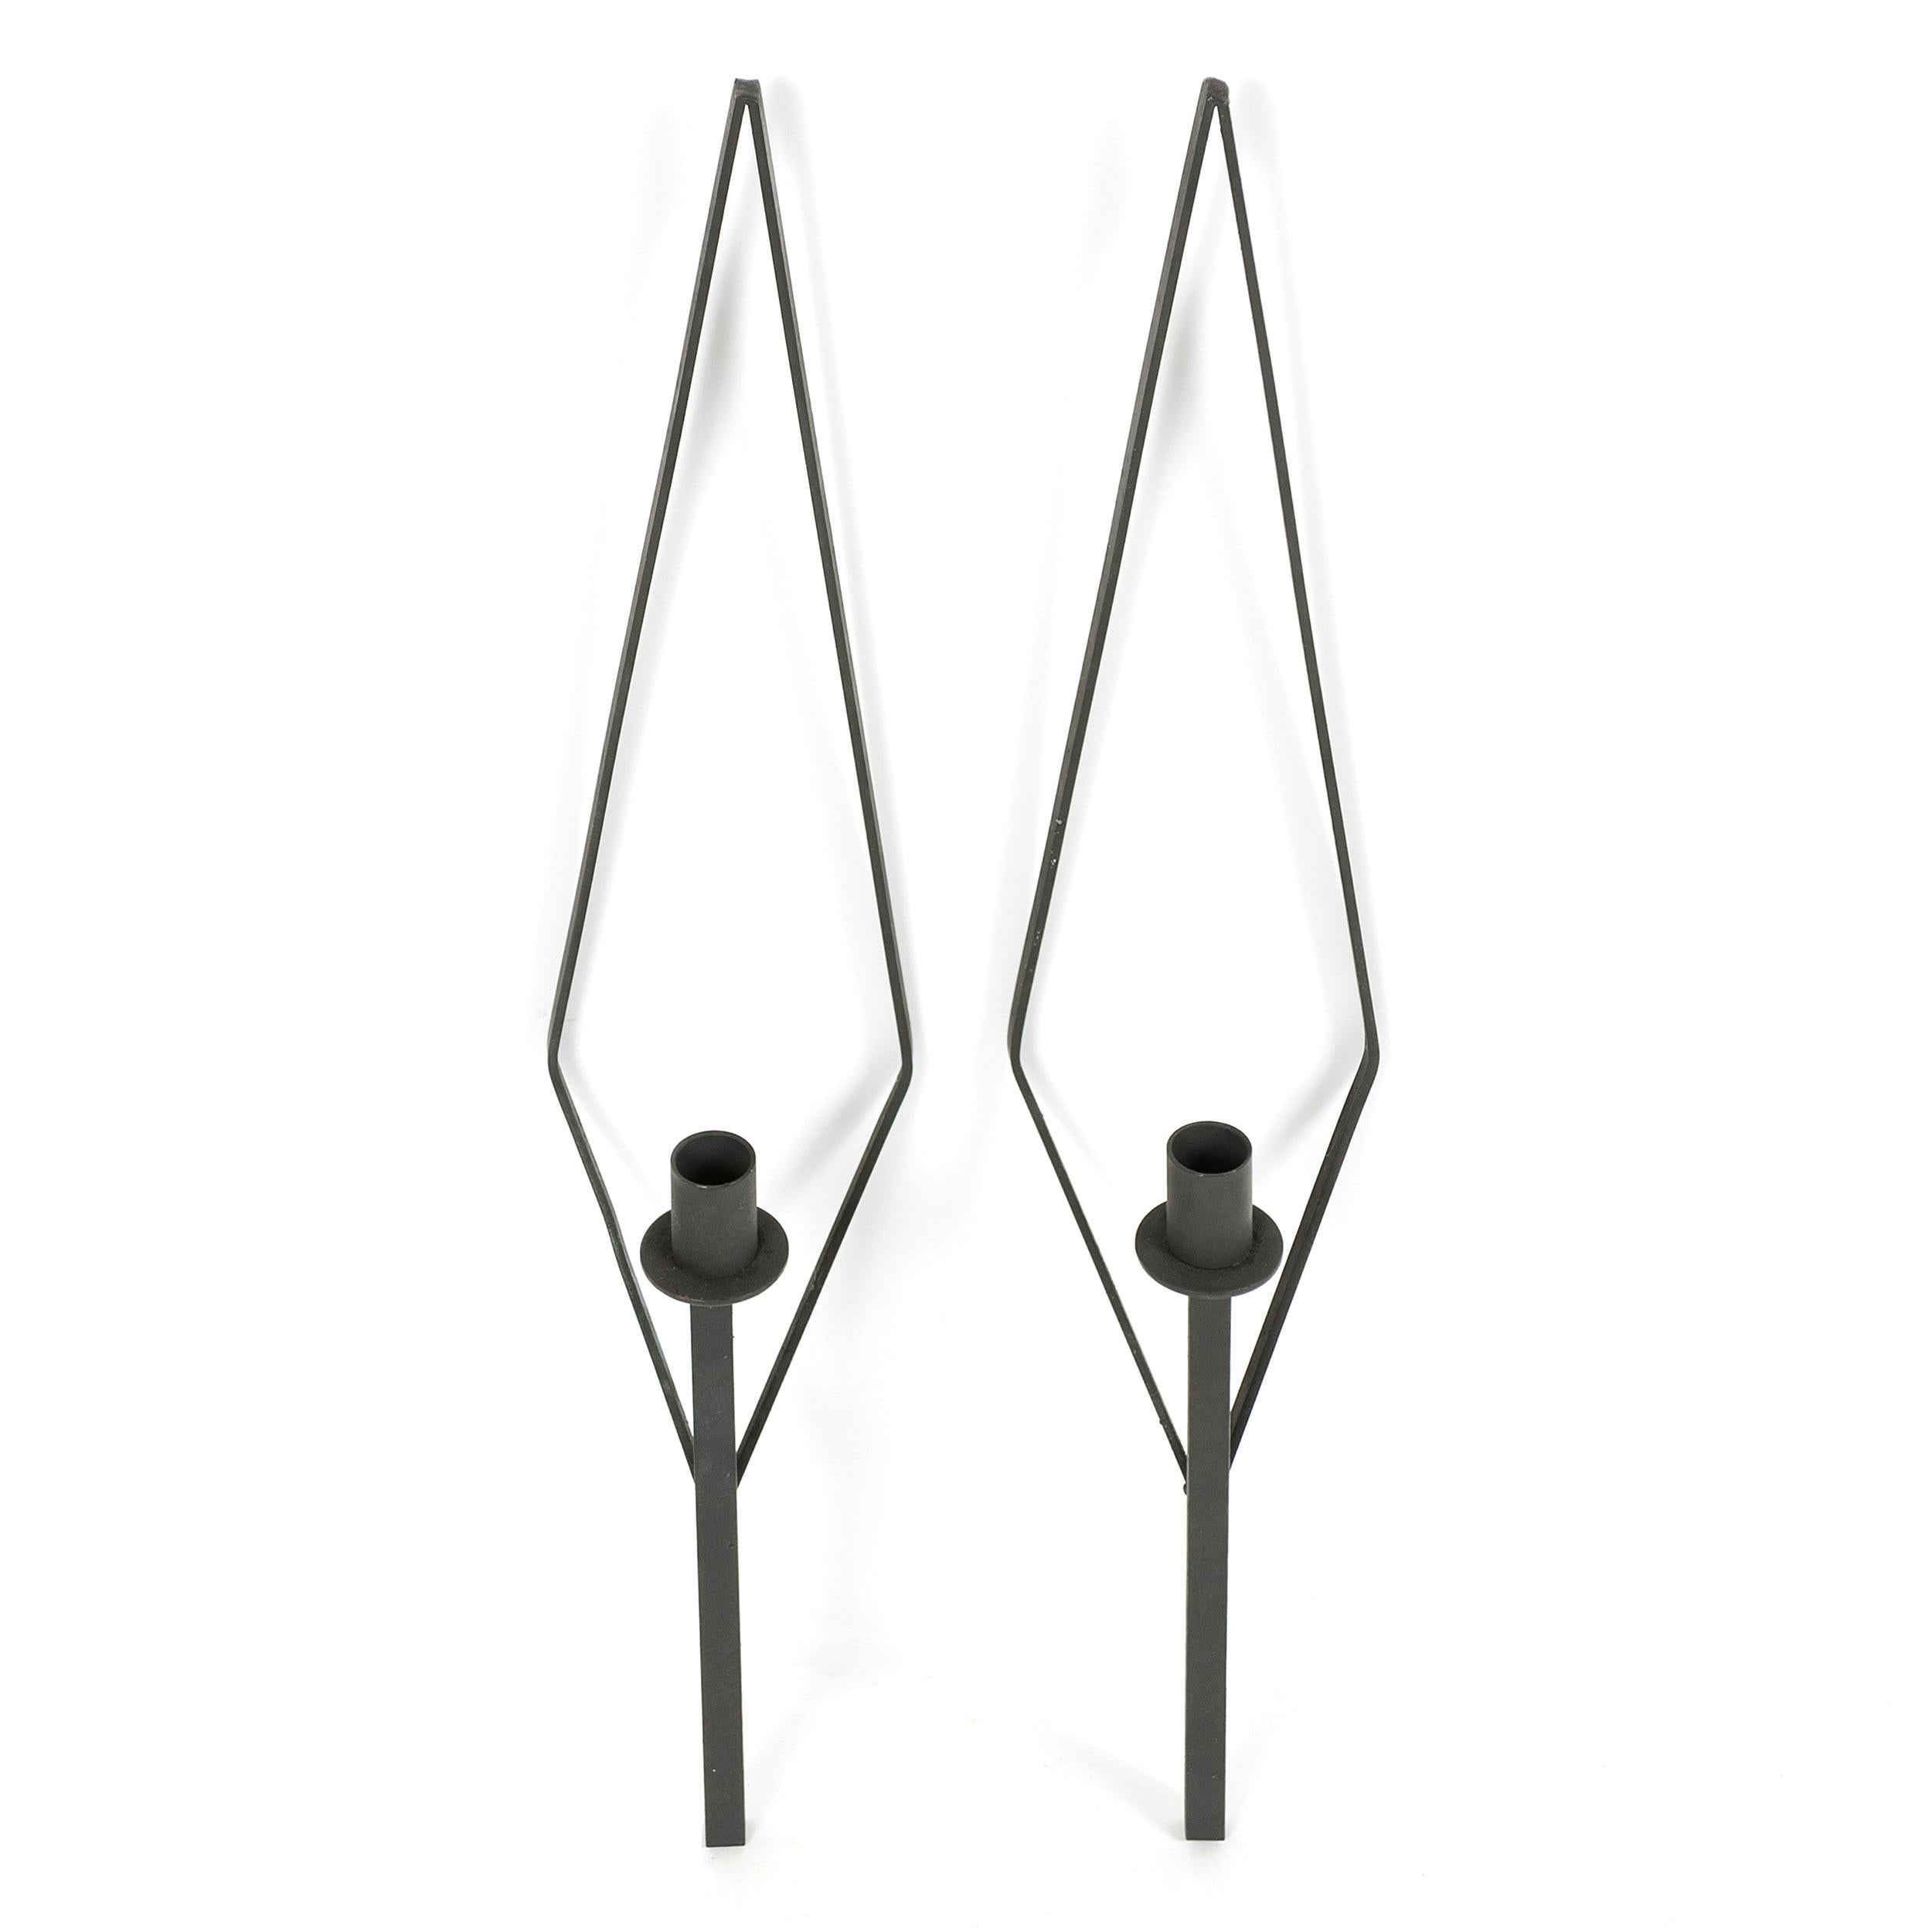 A pair of geometric wrought iron candle sconces.